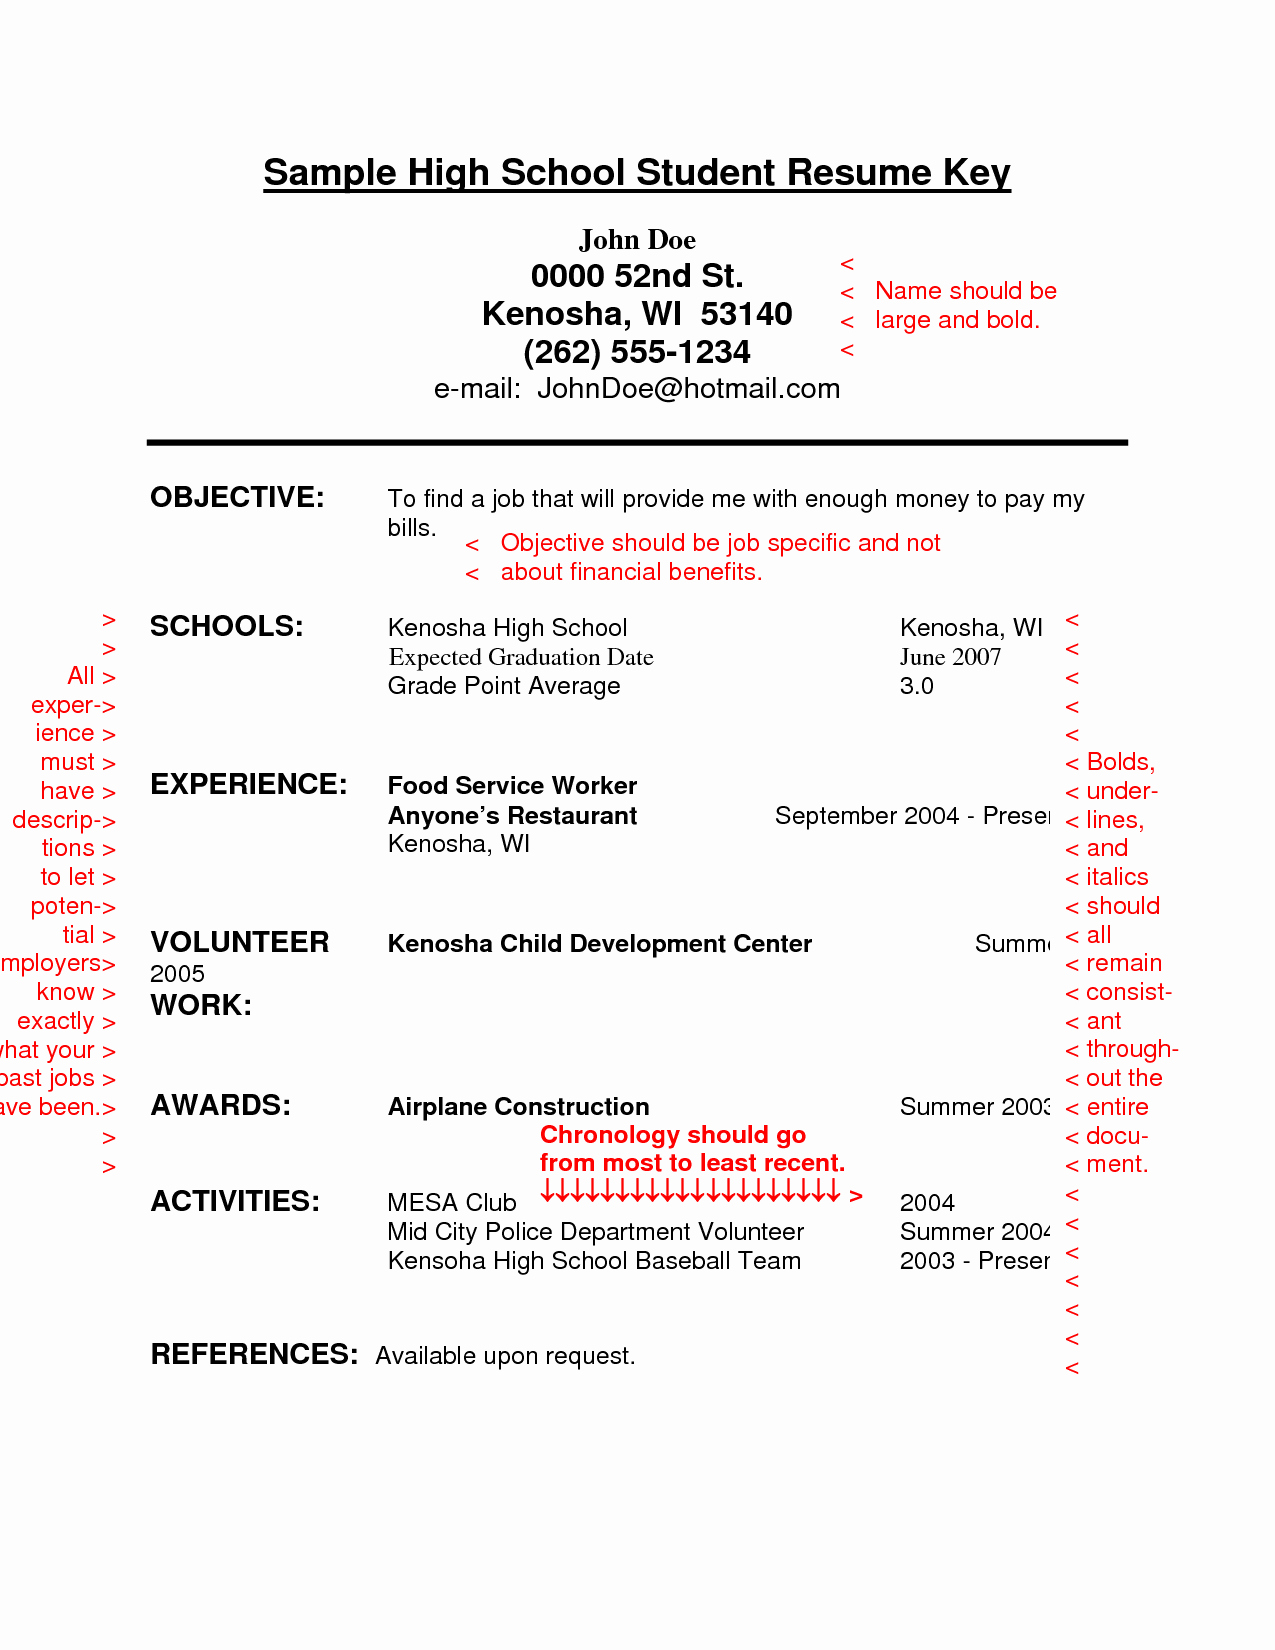 Resume High School Student Best Of Resume Sample for High School Students with No Experience